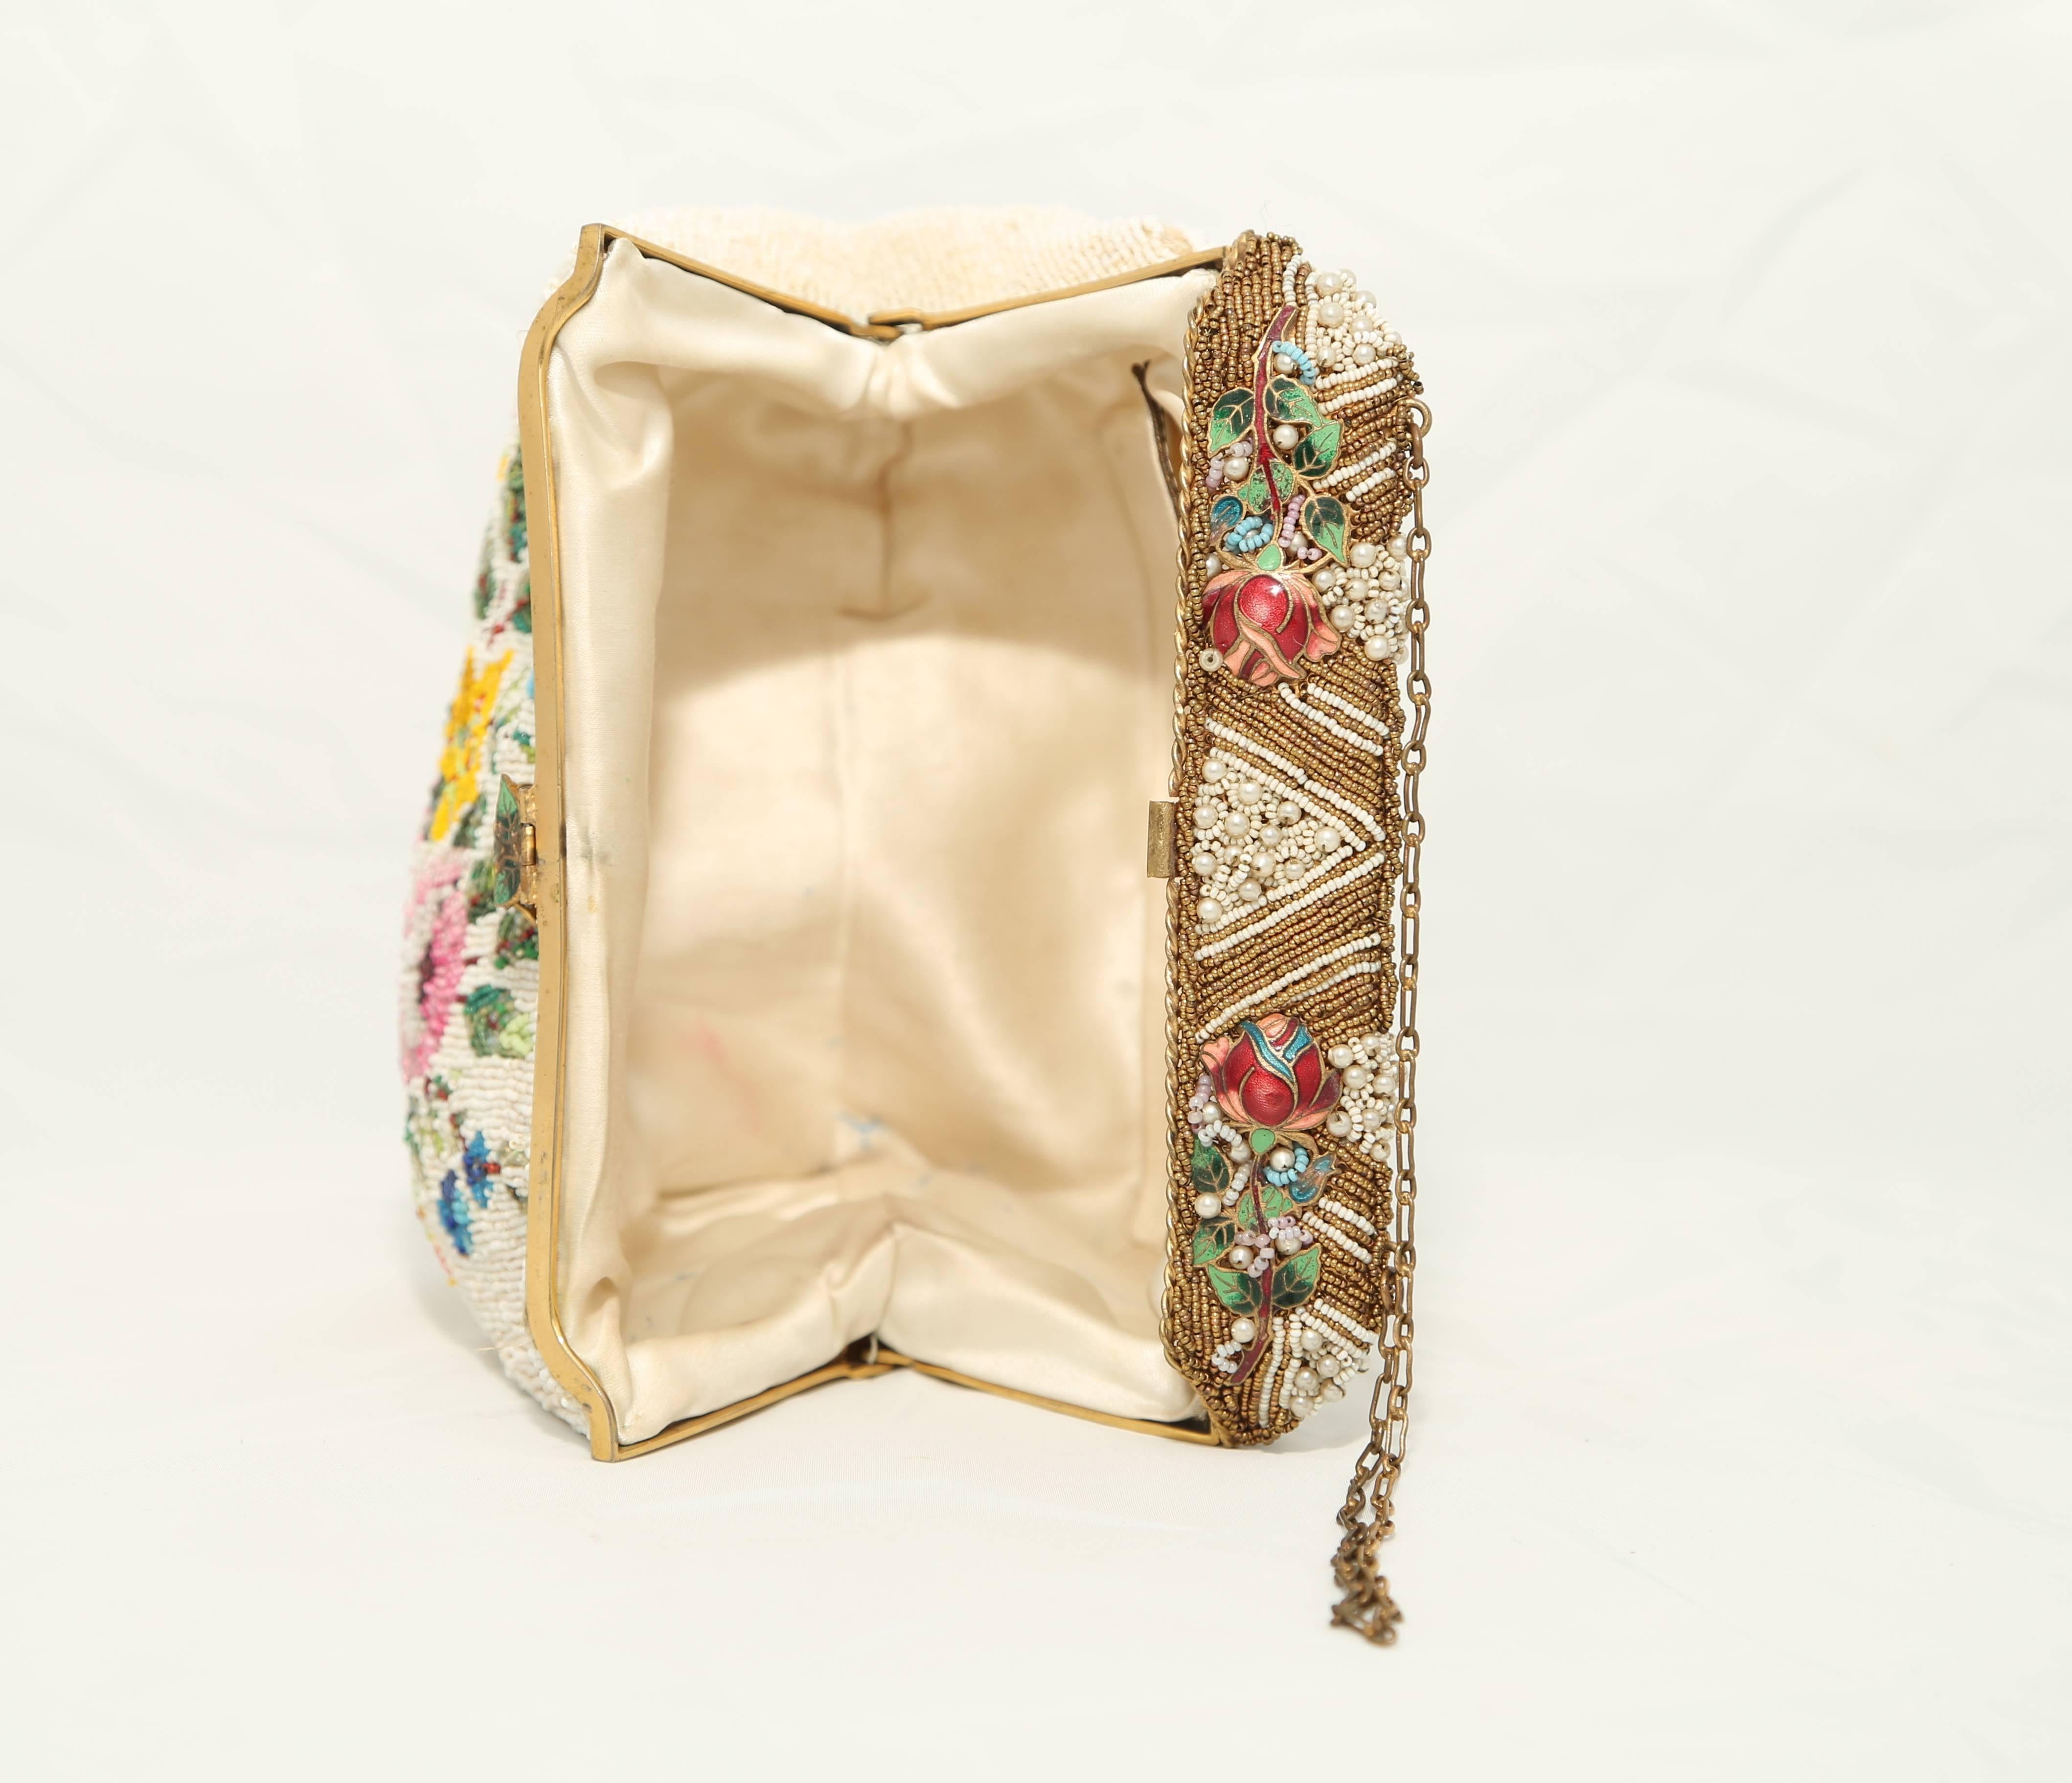 Women's 1920s fully beaded bag with floral pattern enamel handle with small pearls  